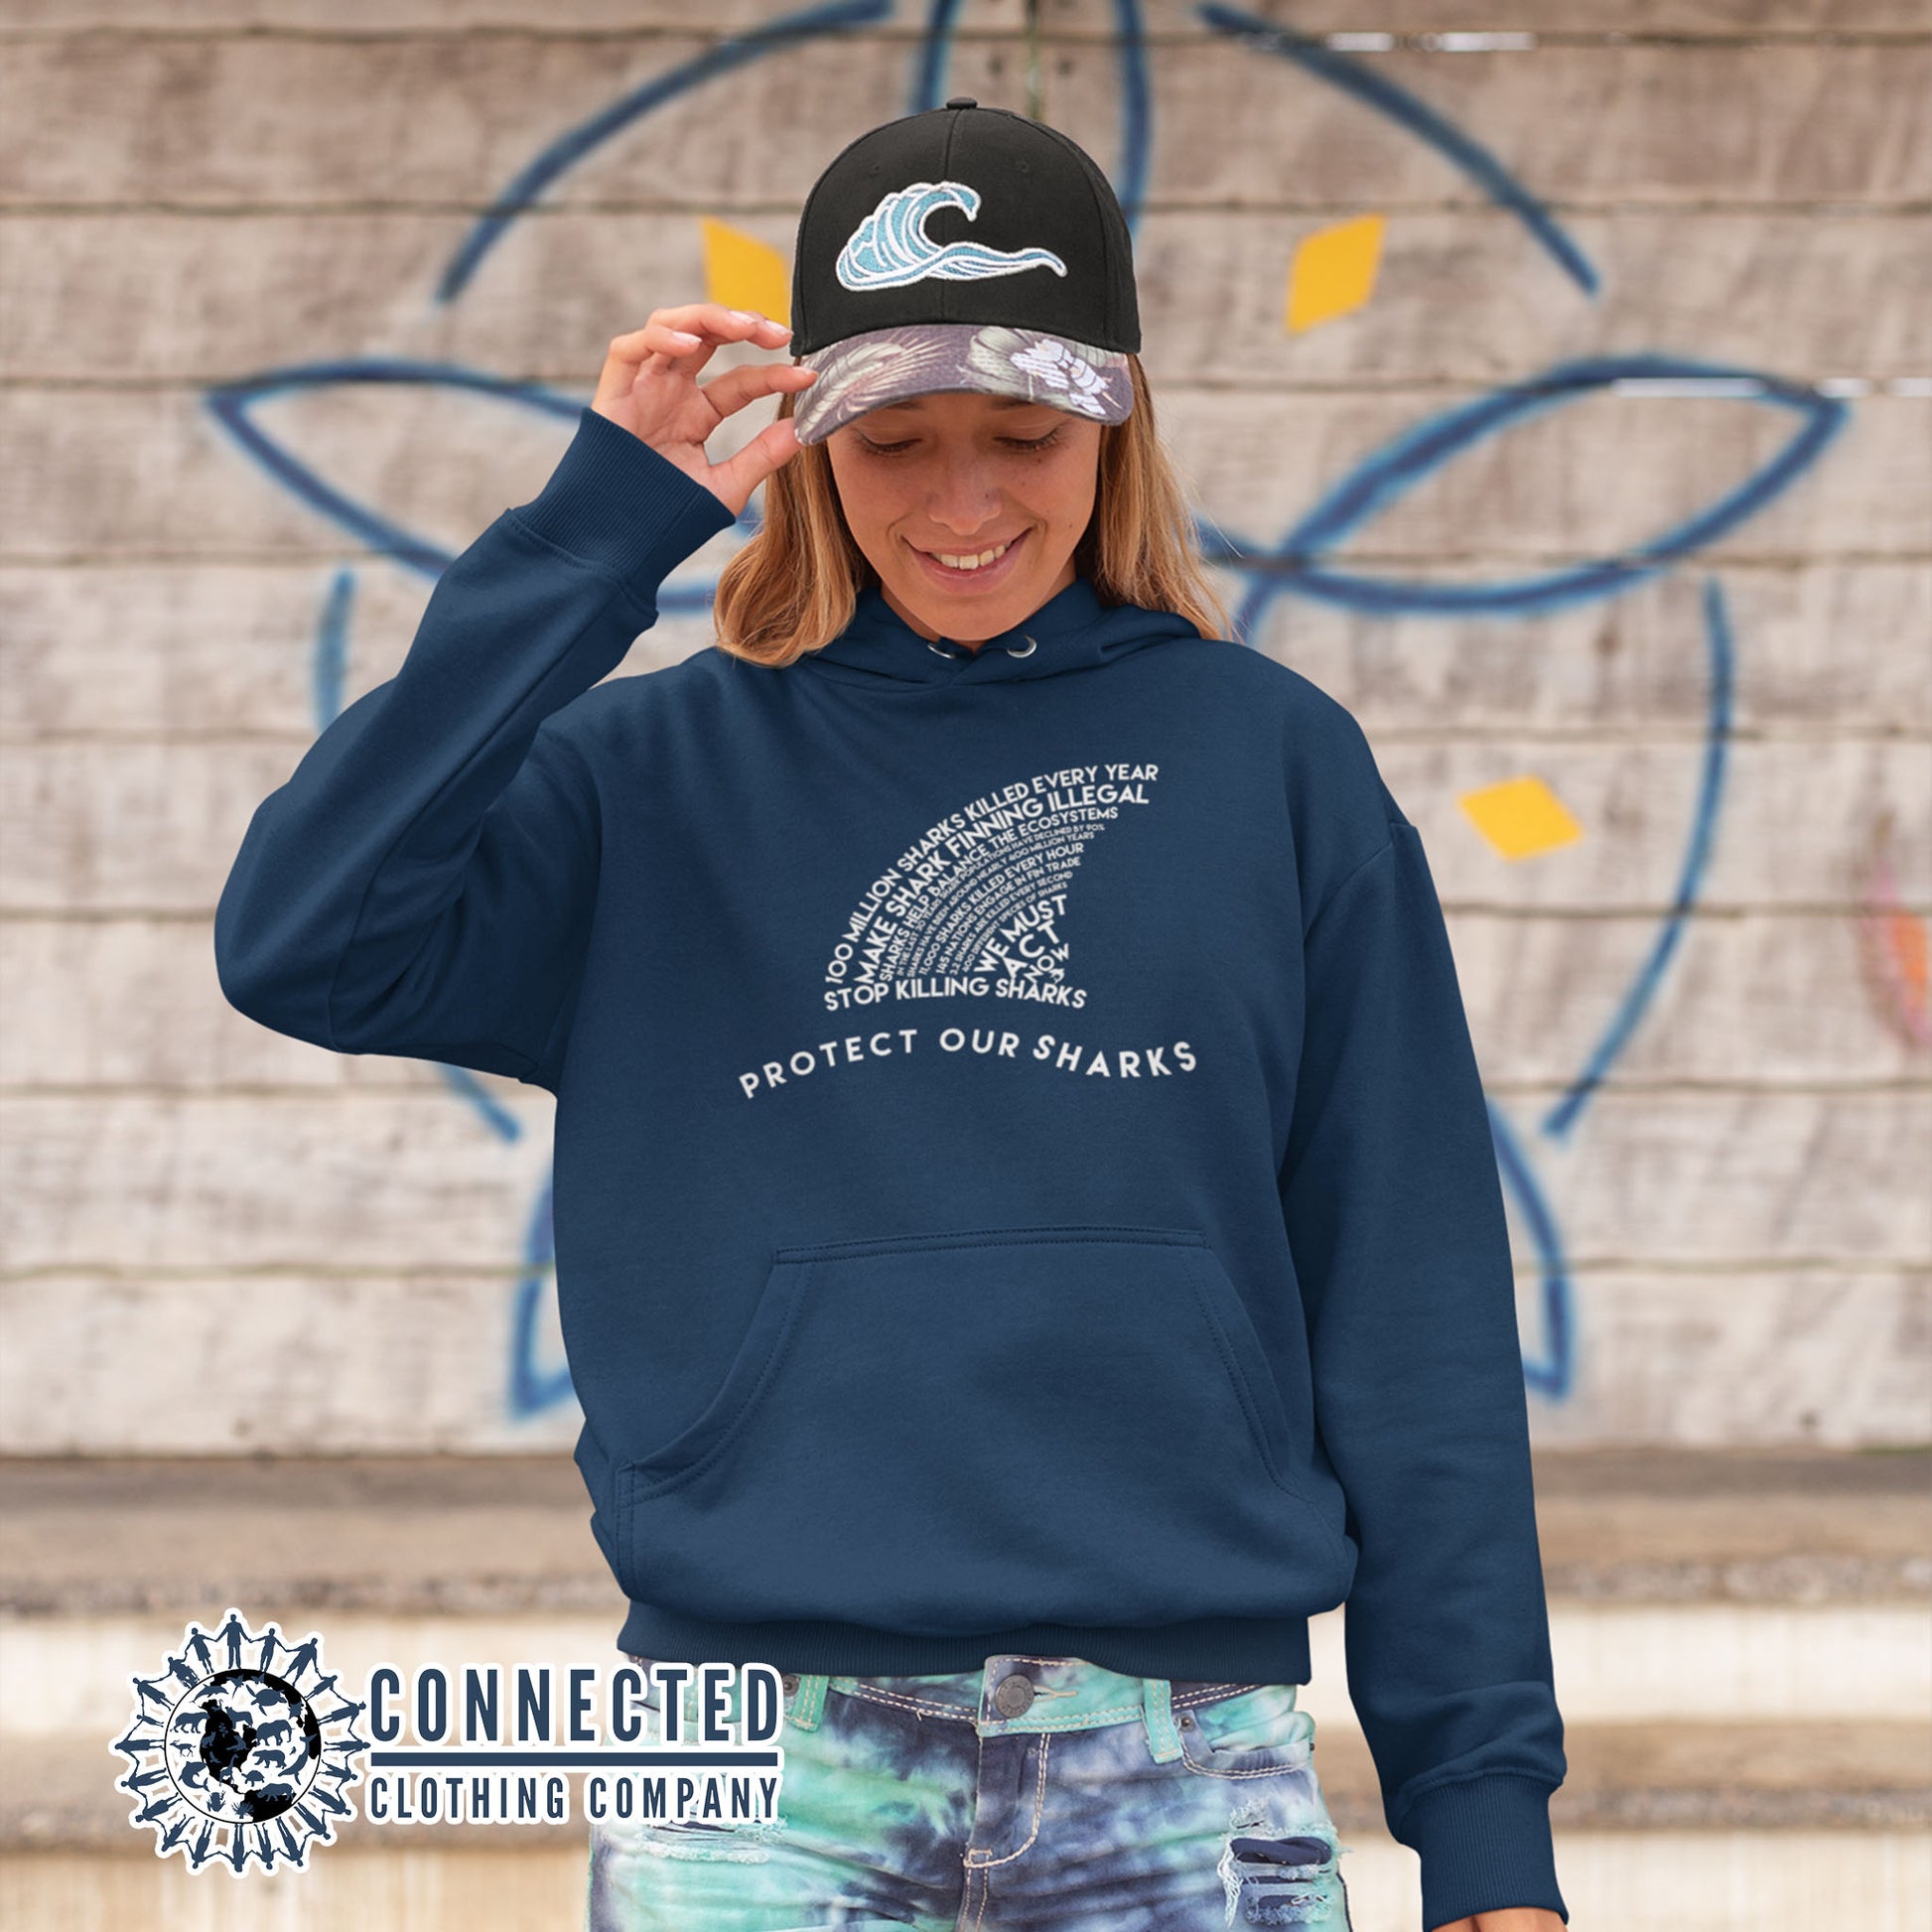 Model Wearing Navy Protect Our Sharks Unisex Hoodie - Connected Clothing Company - Ethically and Sustainably Made - 10% donated to Oceana shark conservation